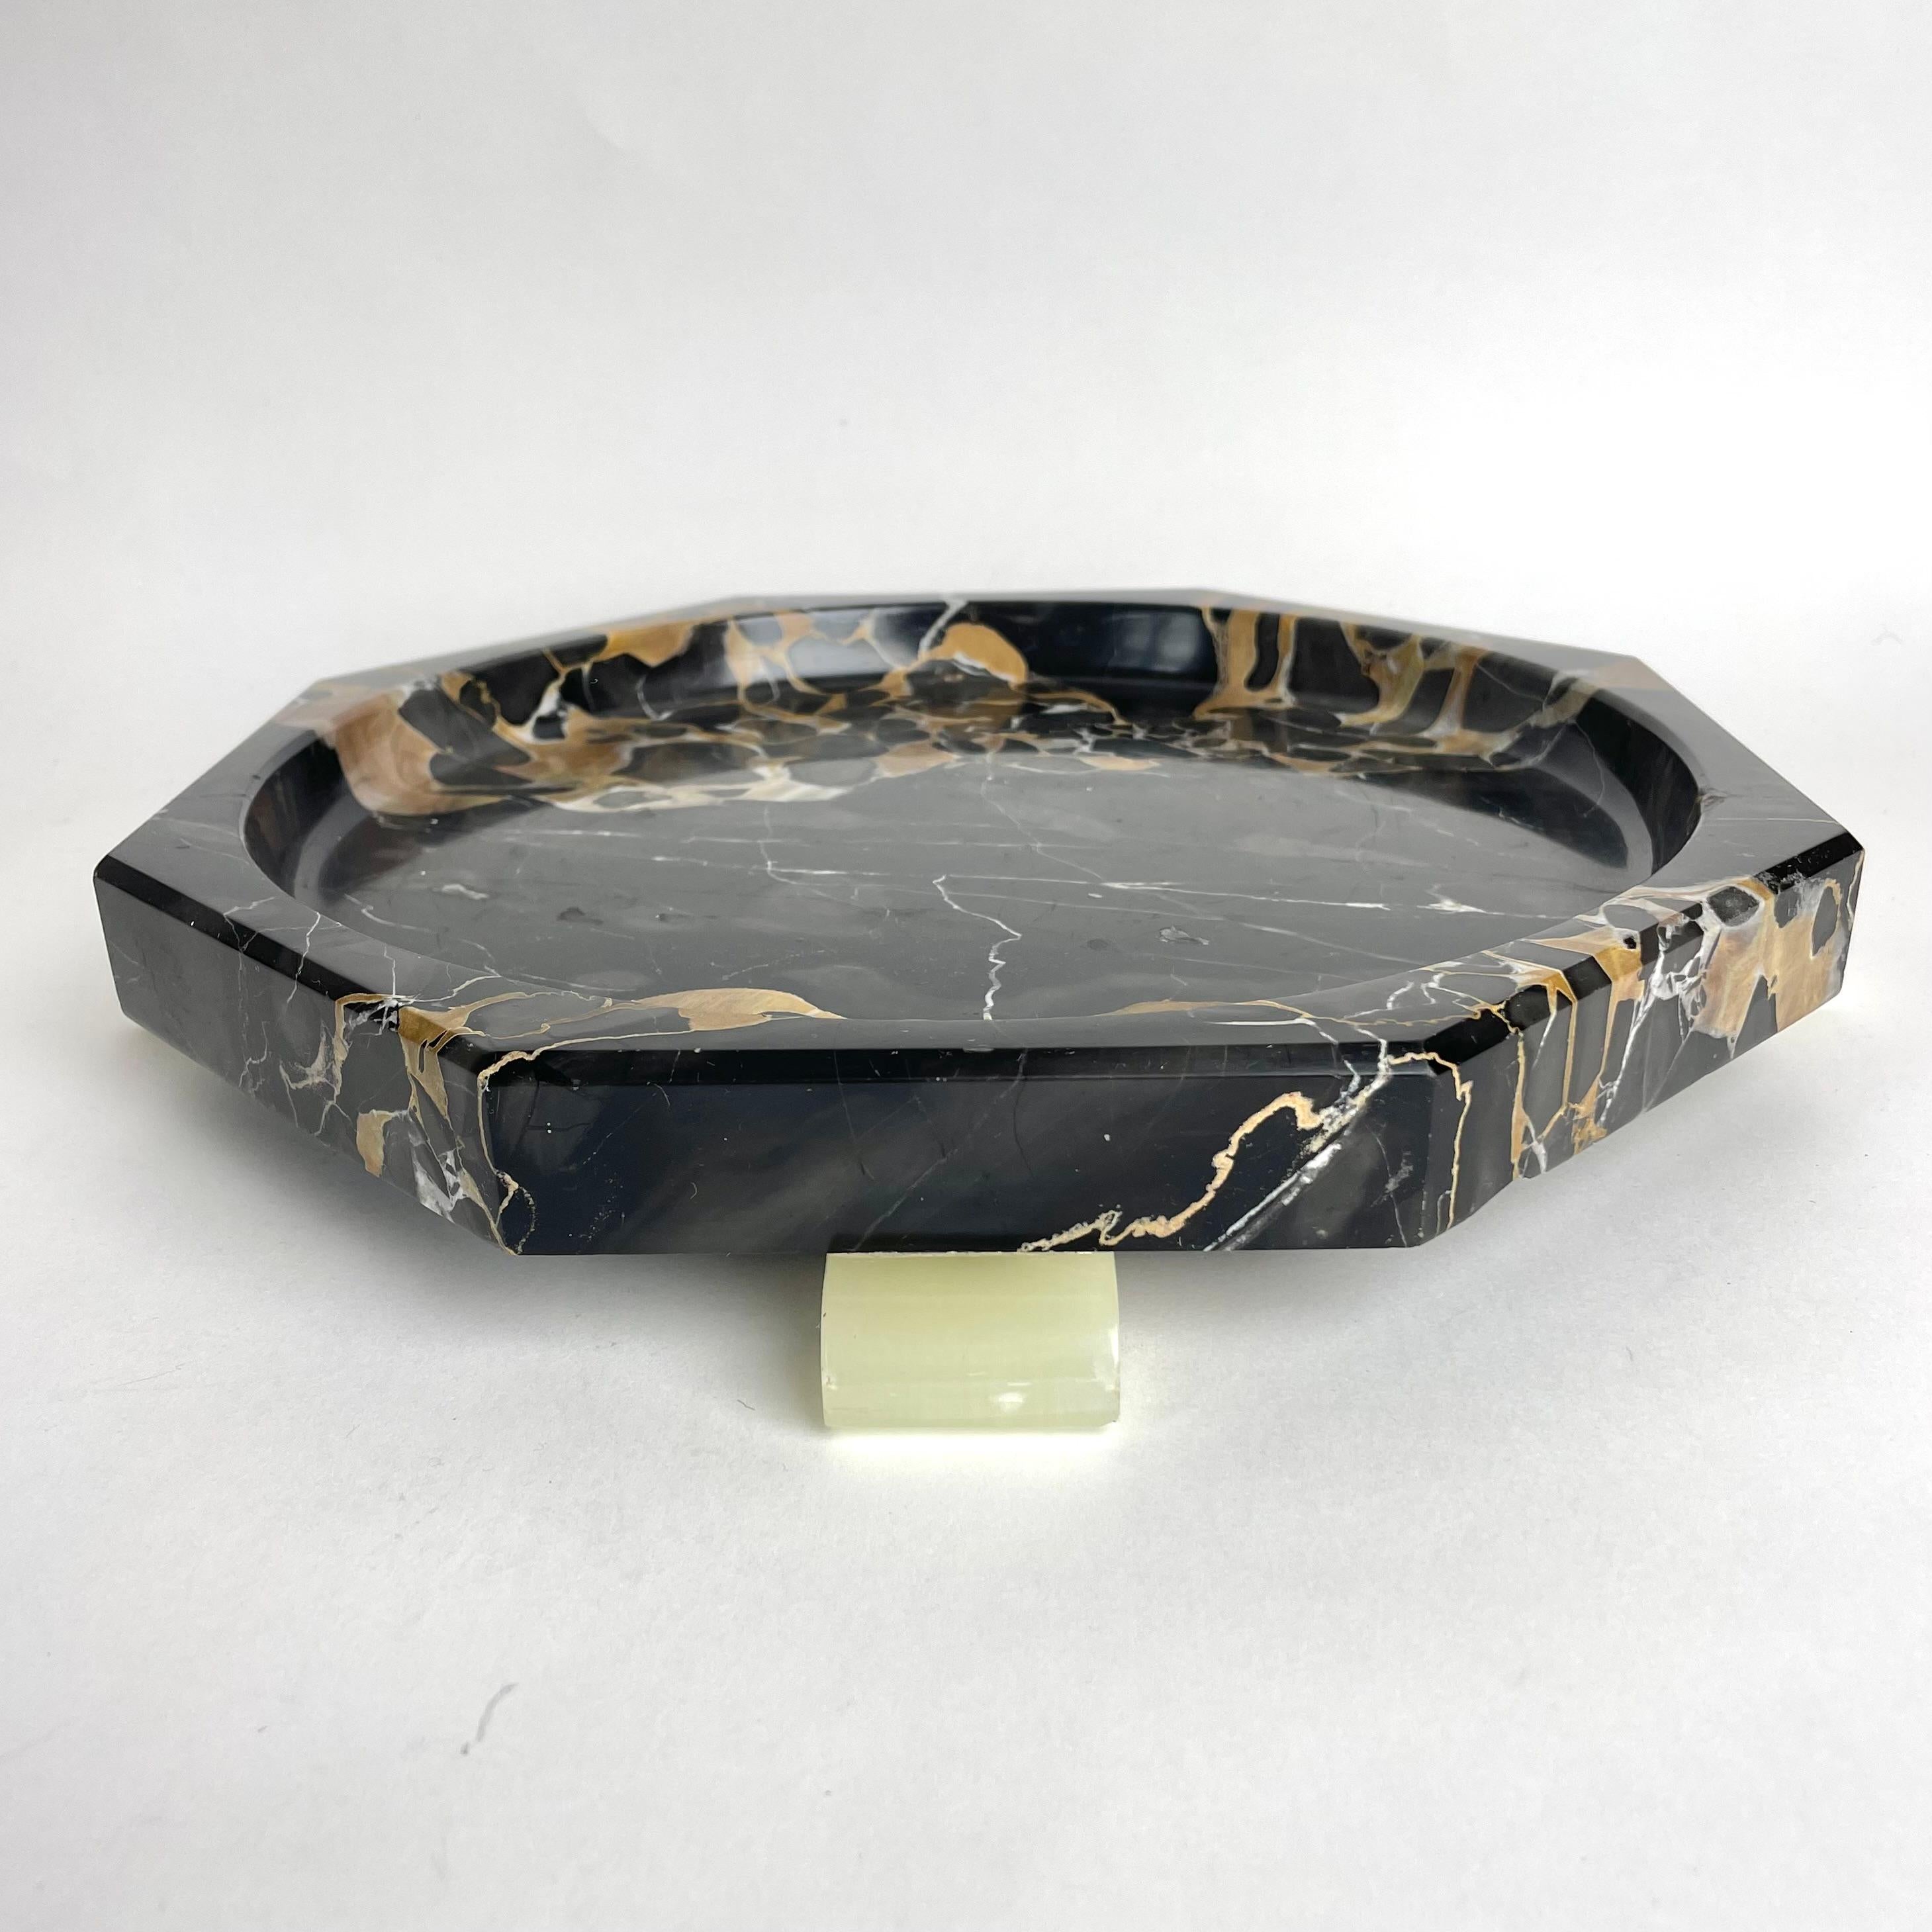 A Beautiful Art Deco Fruit Platter from the 1930s in Portoro marble. Very period design.

Wear consistent with age and use 